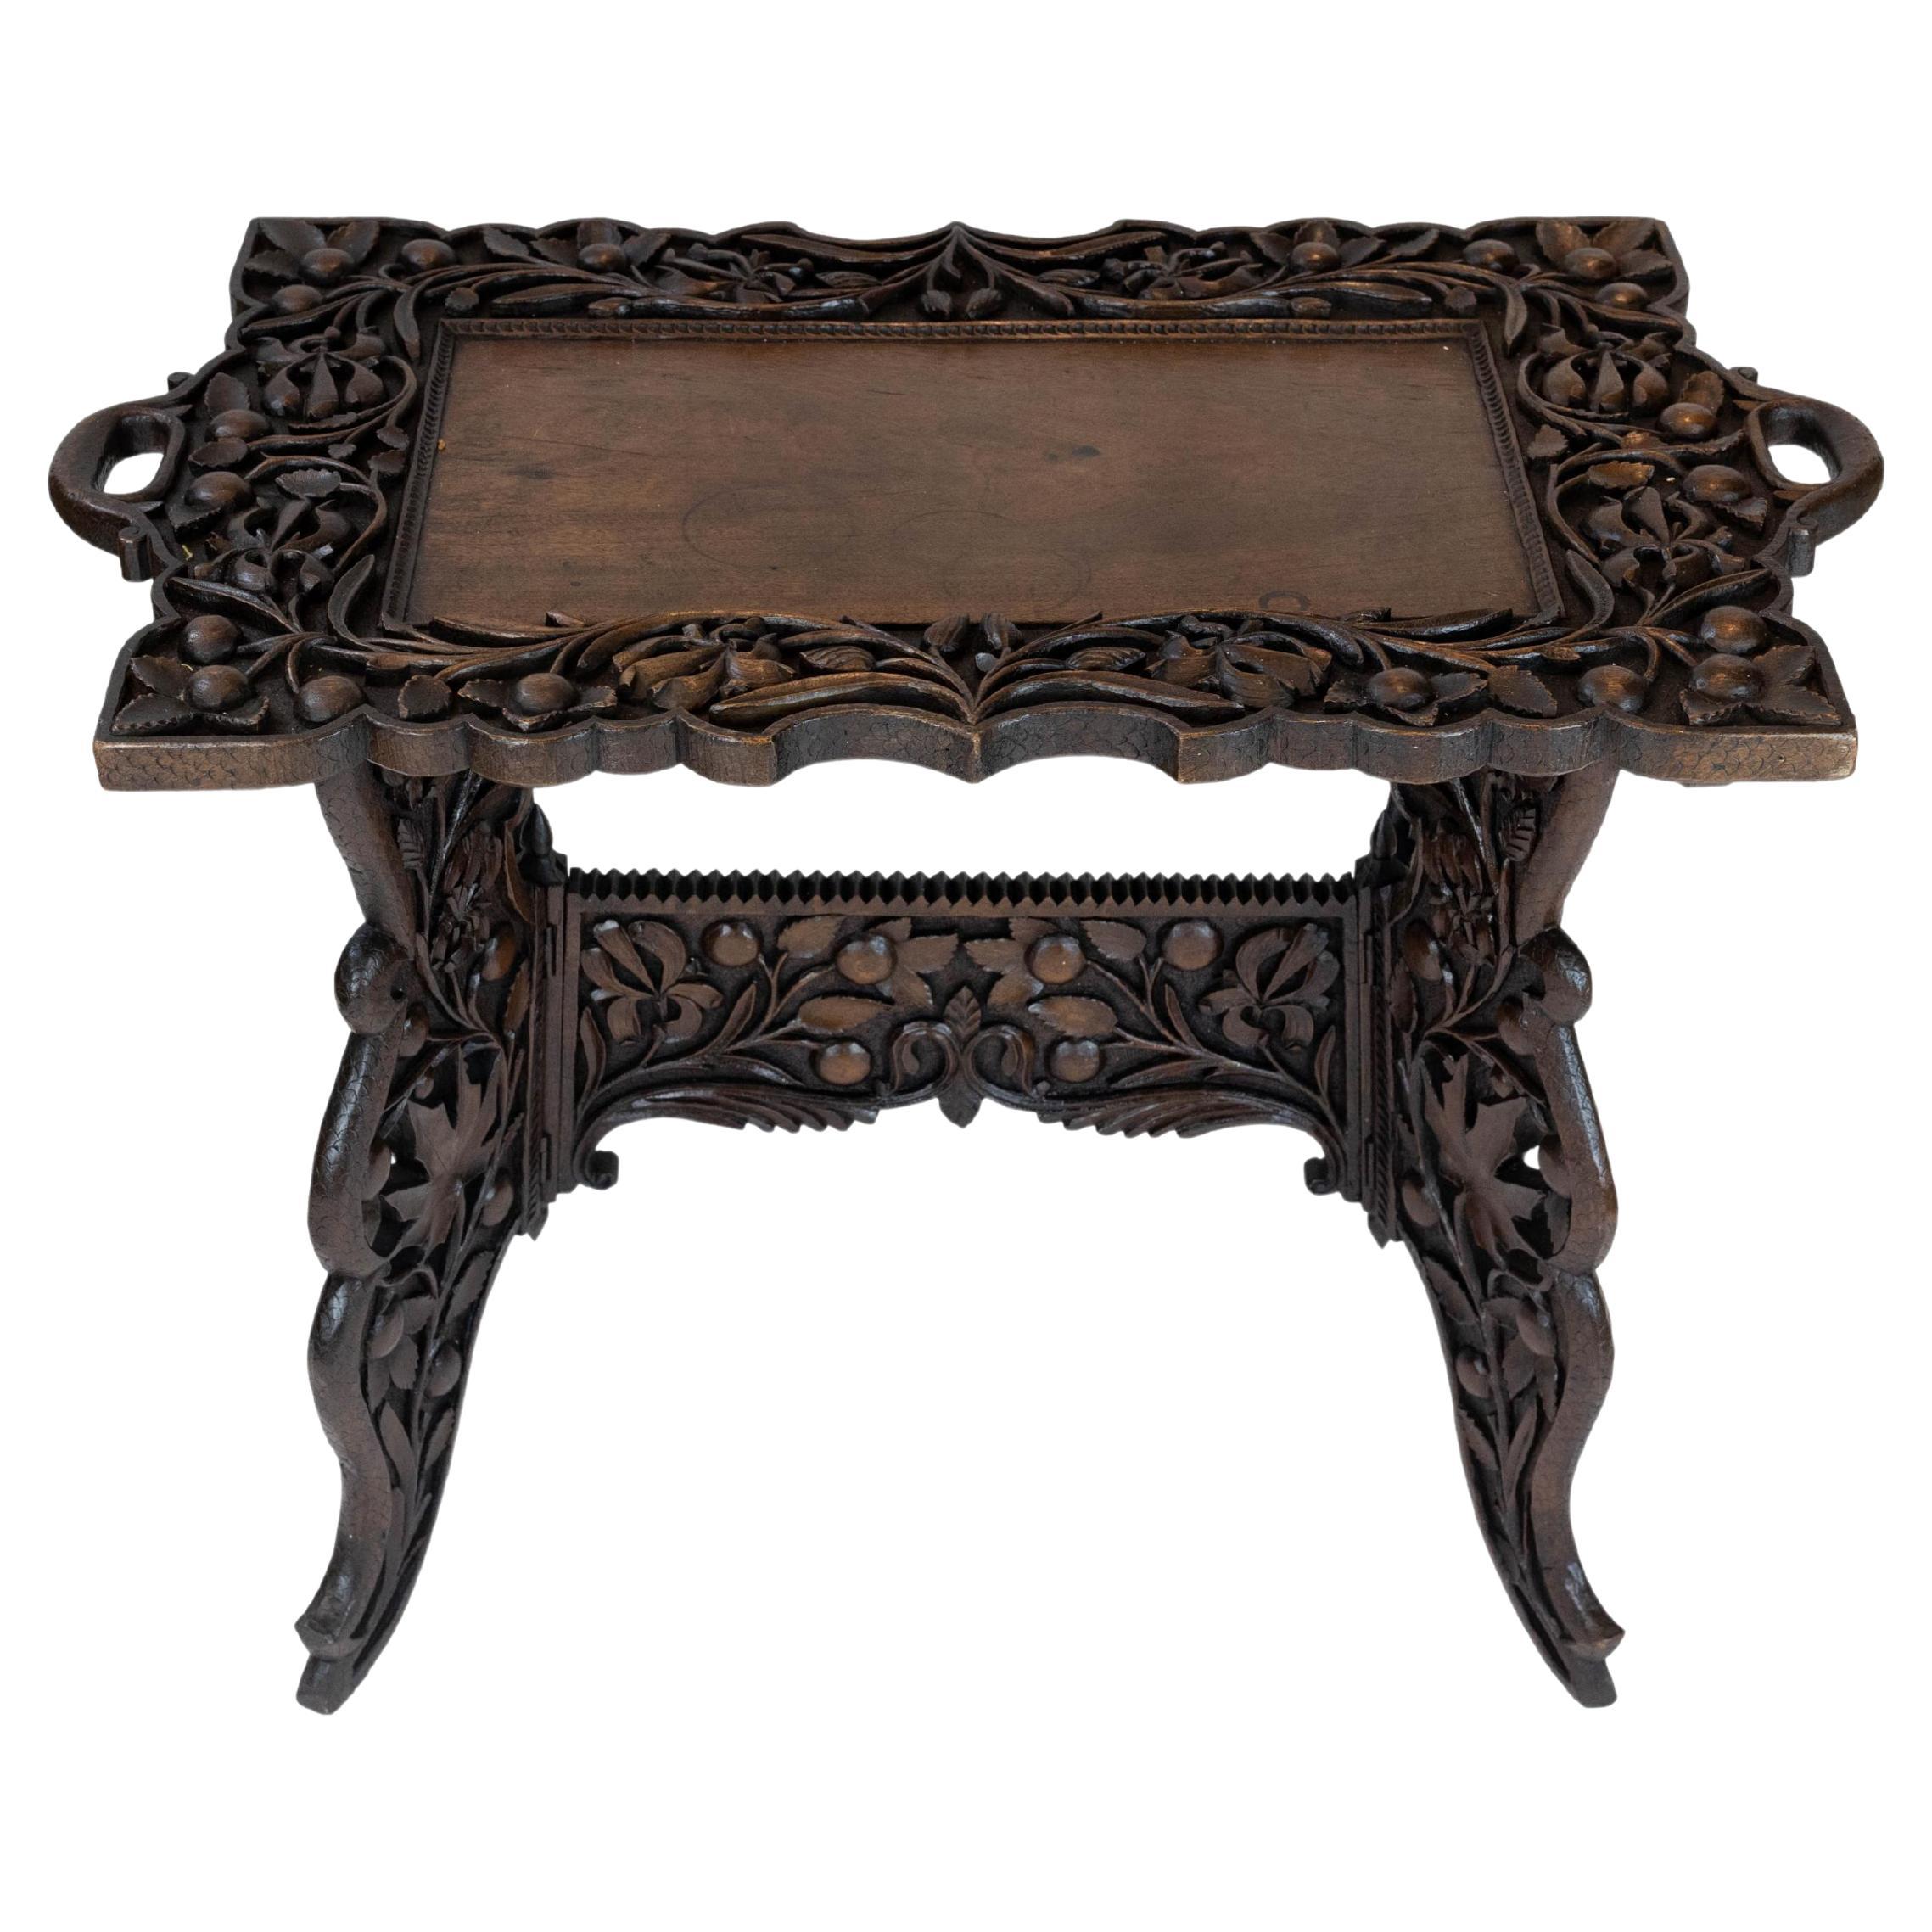 Elaborately Hand-Carved Solid Walnut Campaign Tray-Top Table, English, ca. 1890 For Sale